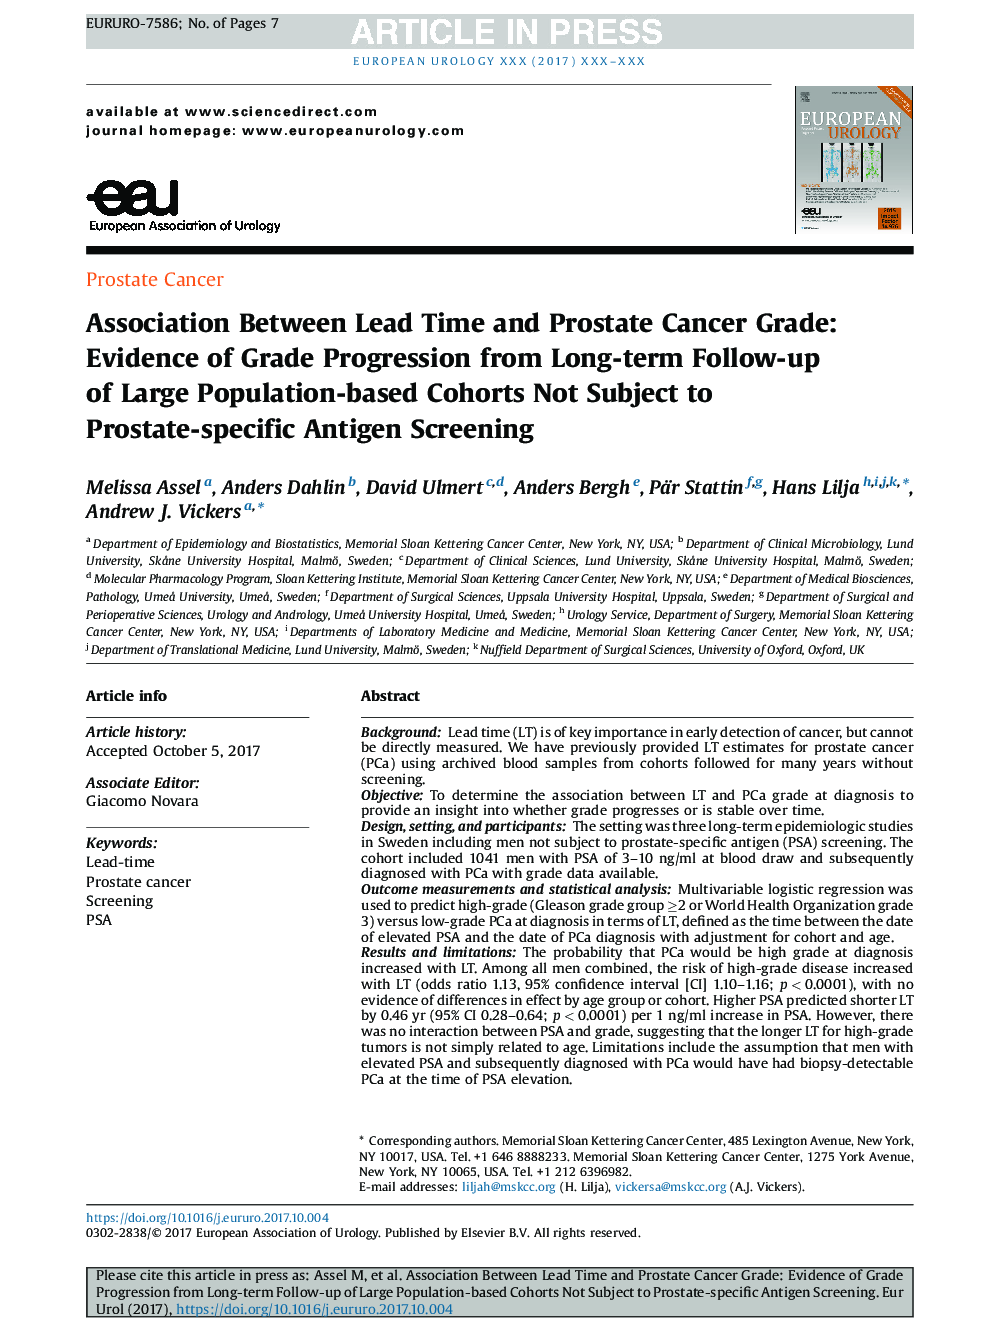 Association Between Lead Time and Prostate Cancer Grade: Evidence of Grade Progression from Long-term Follow-up of Large Population-based Cohorts Not Subject to Prostate-specific Antigen Screening